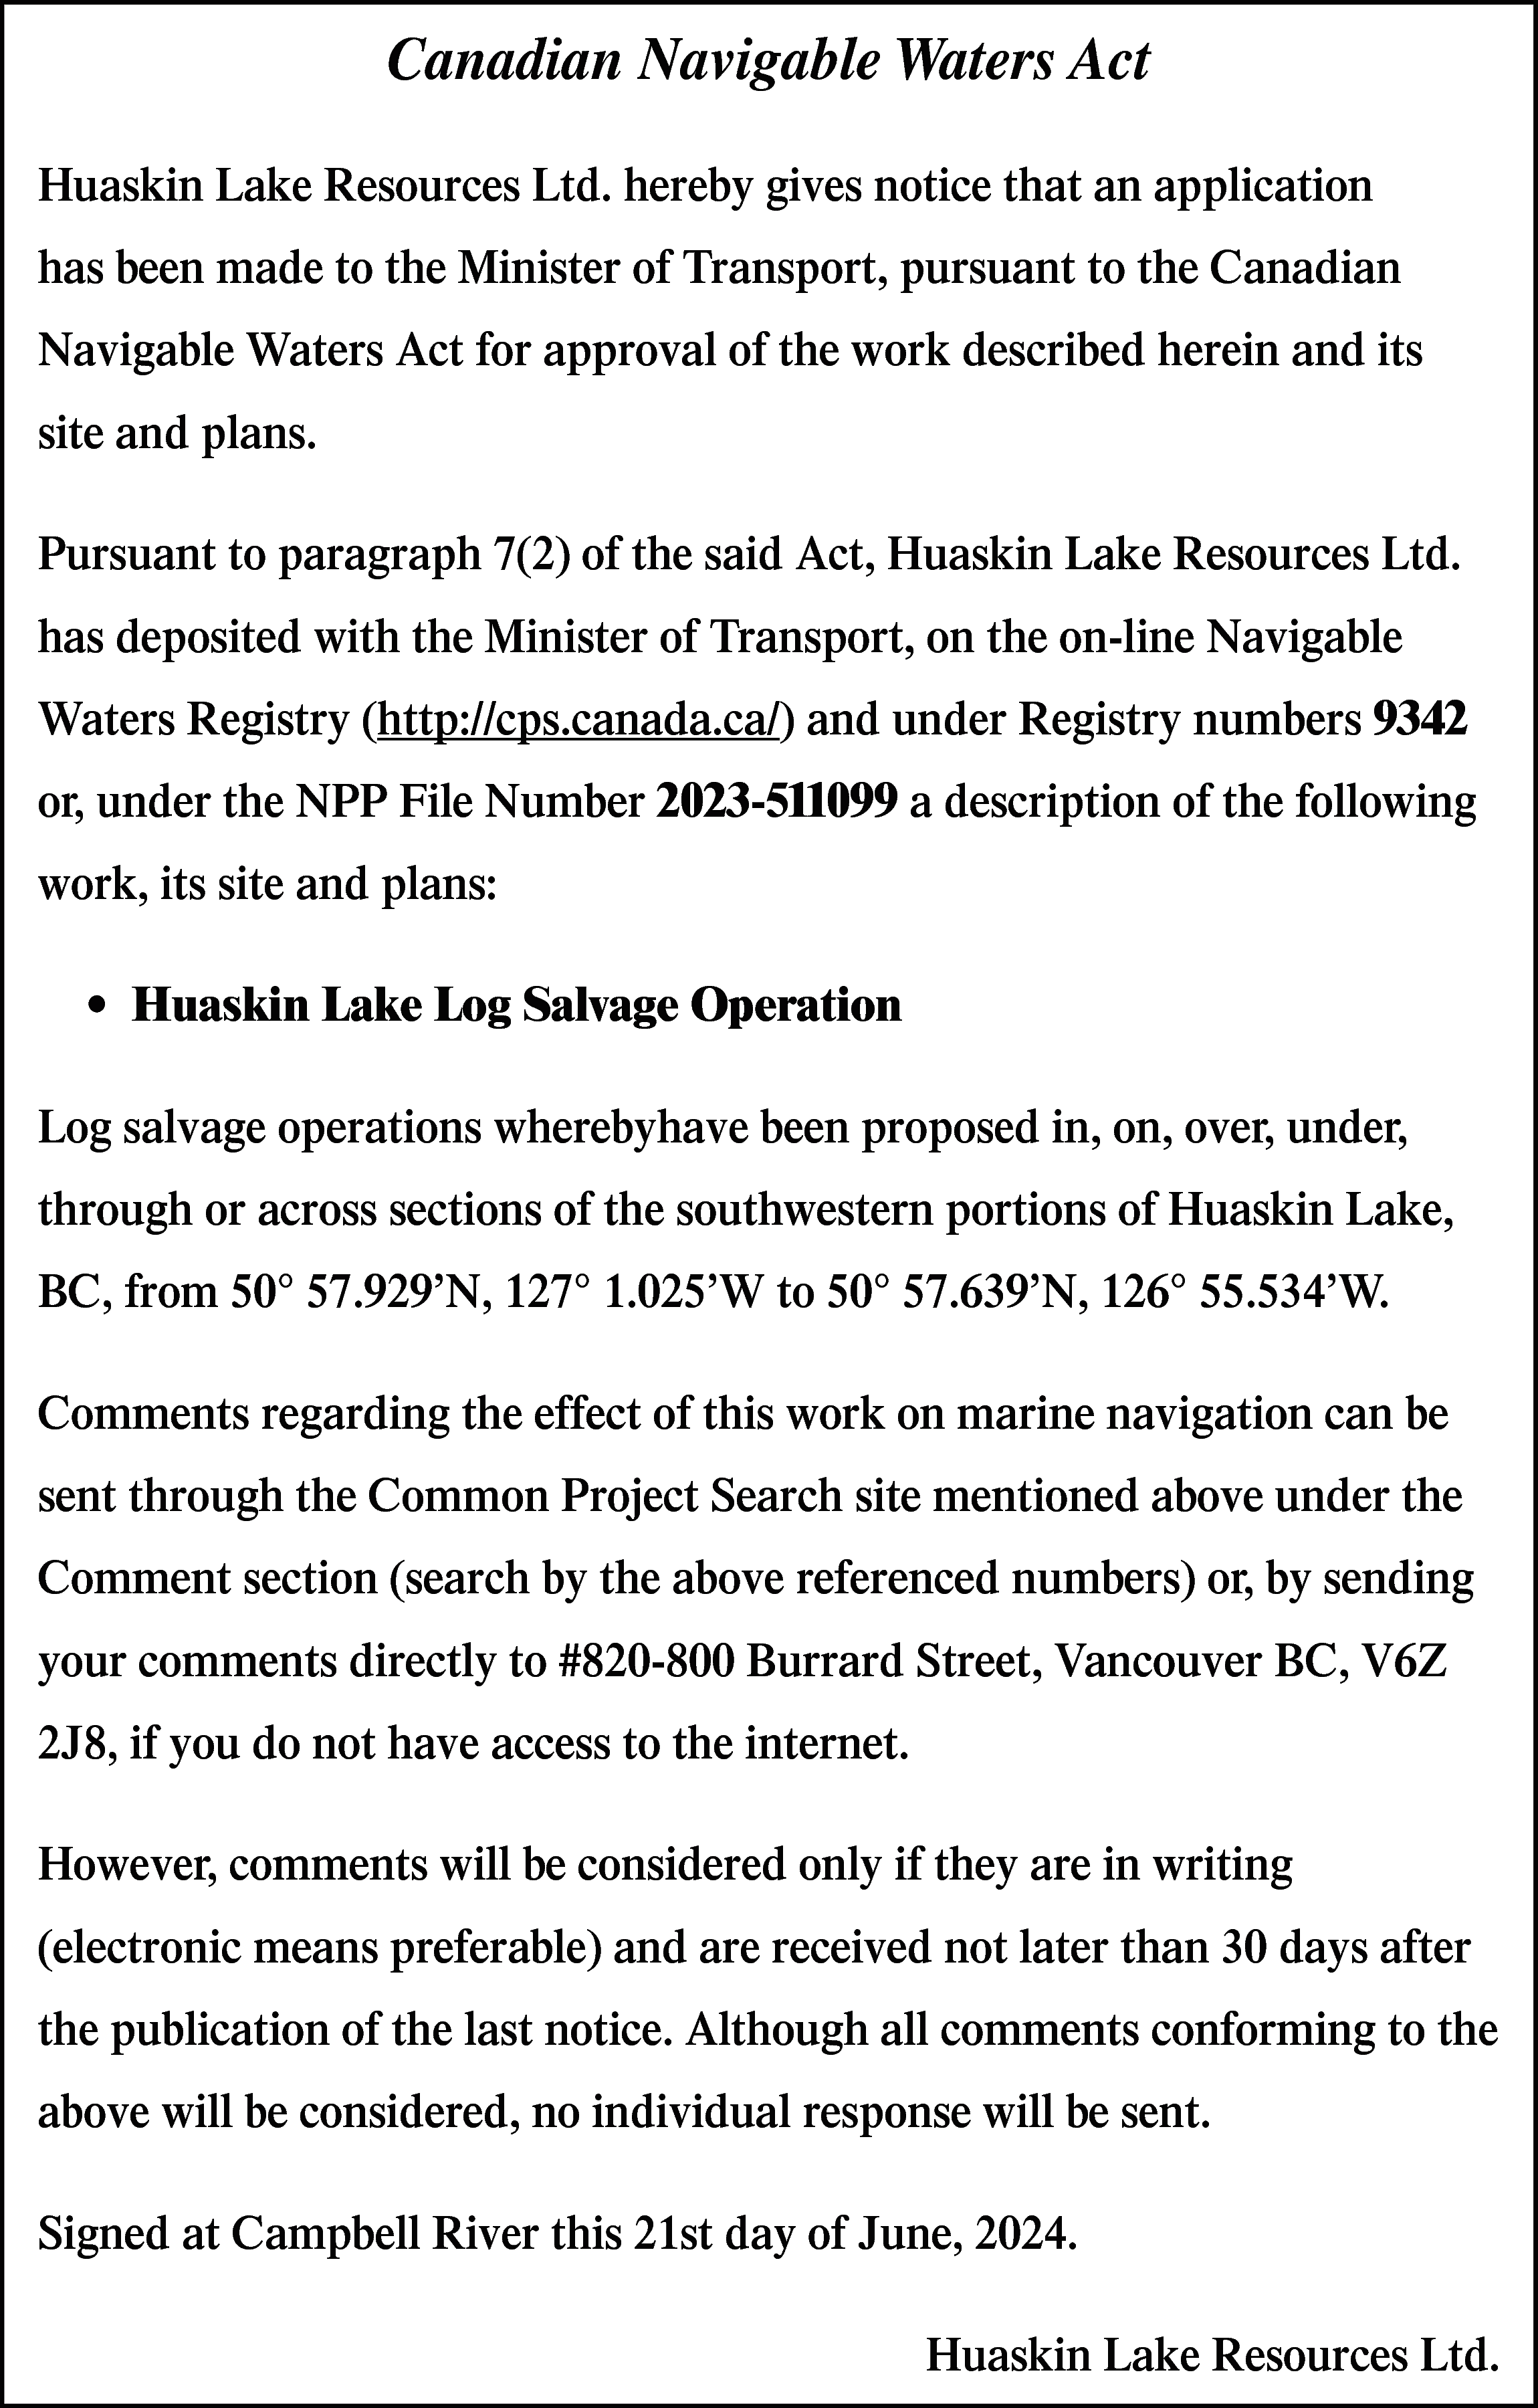 Canadian Navigable Waters Act <br>Huaskin  Canadian Navigable Waters Act  Huaskin Lake Resources Ltd. hereby gives notice that an application  has been made to the Minister of Transport, pursuant to the Canadian  Navigable Waters Act for approval of the work described herein and its  site and plans.  Pursuant to paragraph 7(2) of the said Act, Huaskin Lake Resources Ltd.  has deposited with the Minister of Transport, on the on-line Navigable  Waters Registry (http://cps.canada.ca/) and under Registry numbers 9342  or, under the NPP File Number 2023-511099 a description of the following  work, its site and plans:  • Huaskin Lake Log Salvage Operation  Log salvage operations wherebyhave been proposed in, on, over, under,  through or across sections of the southwestern portions of Huaskin Lake,  BC, from 50° 57.929’N, 127° 1.025’W to 50° 57.639’N, 126° 55.534’W.  Comments regarding the effect of this work on marine navigation can be  sent through the Common Project Search site mentioned above under the  Comment section (search by the above referenced numbers) or, by sending  your comments directly to #820-800 Burrard Street, Vancouver BC, V6Z  2J8, if you do not have access to the internet.  However, comments will be considered only if they are in writing  (electronic means preferable) and are received not later than 30 days after  the publication of the last notice. Although all comments conforming to the  above will be considered, no individual response will be sent.  Signed at Campbell River this 21st day of June, 2024.  Huaskin Lake Resources Ltd.    